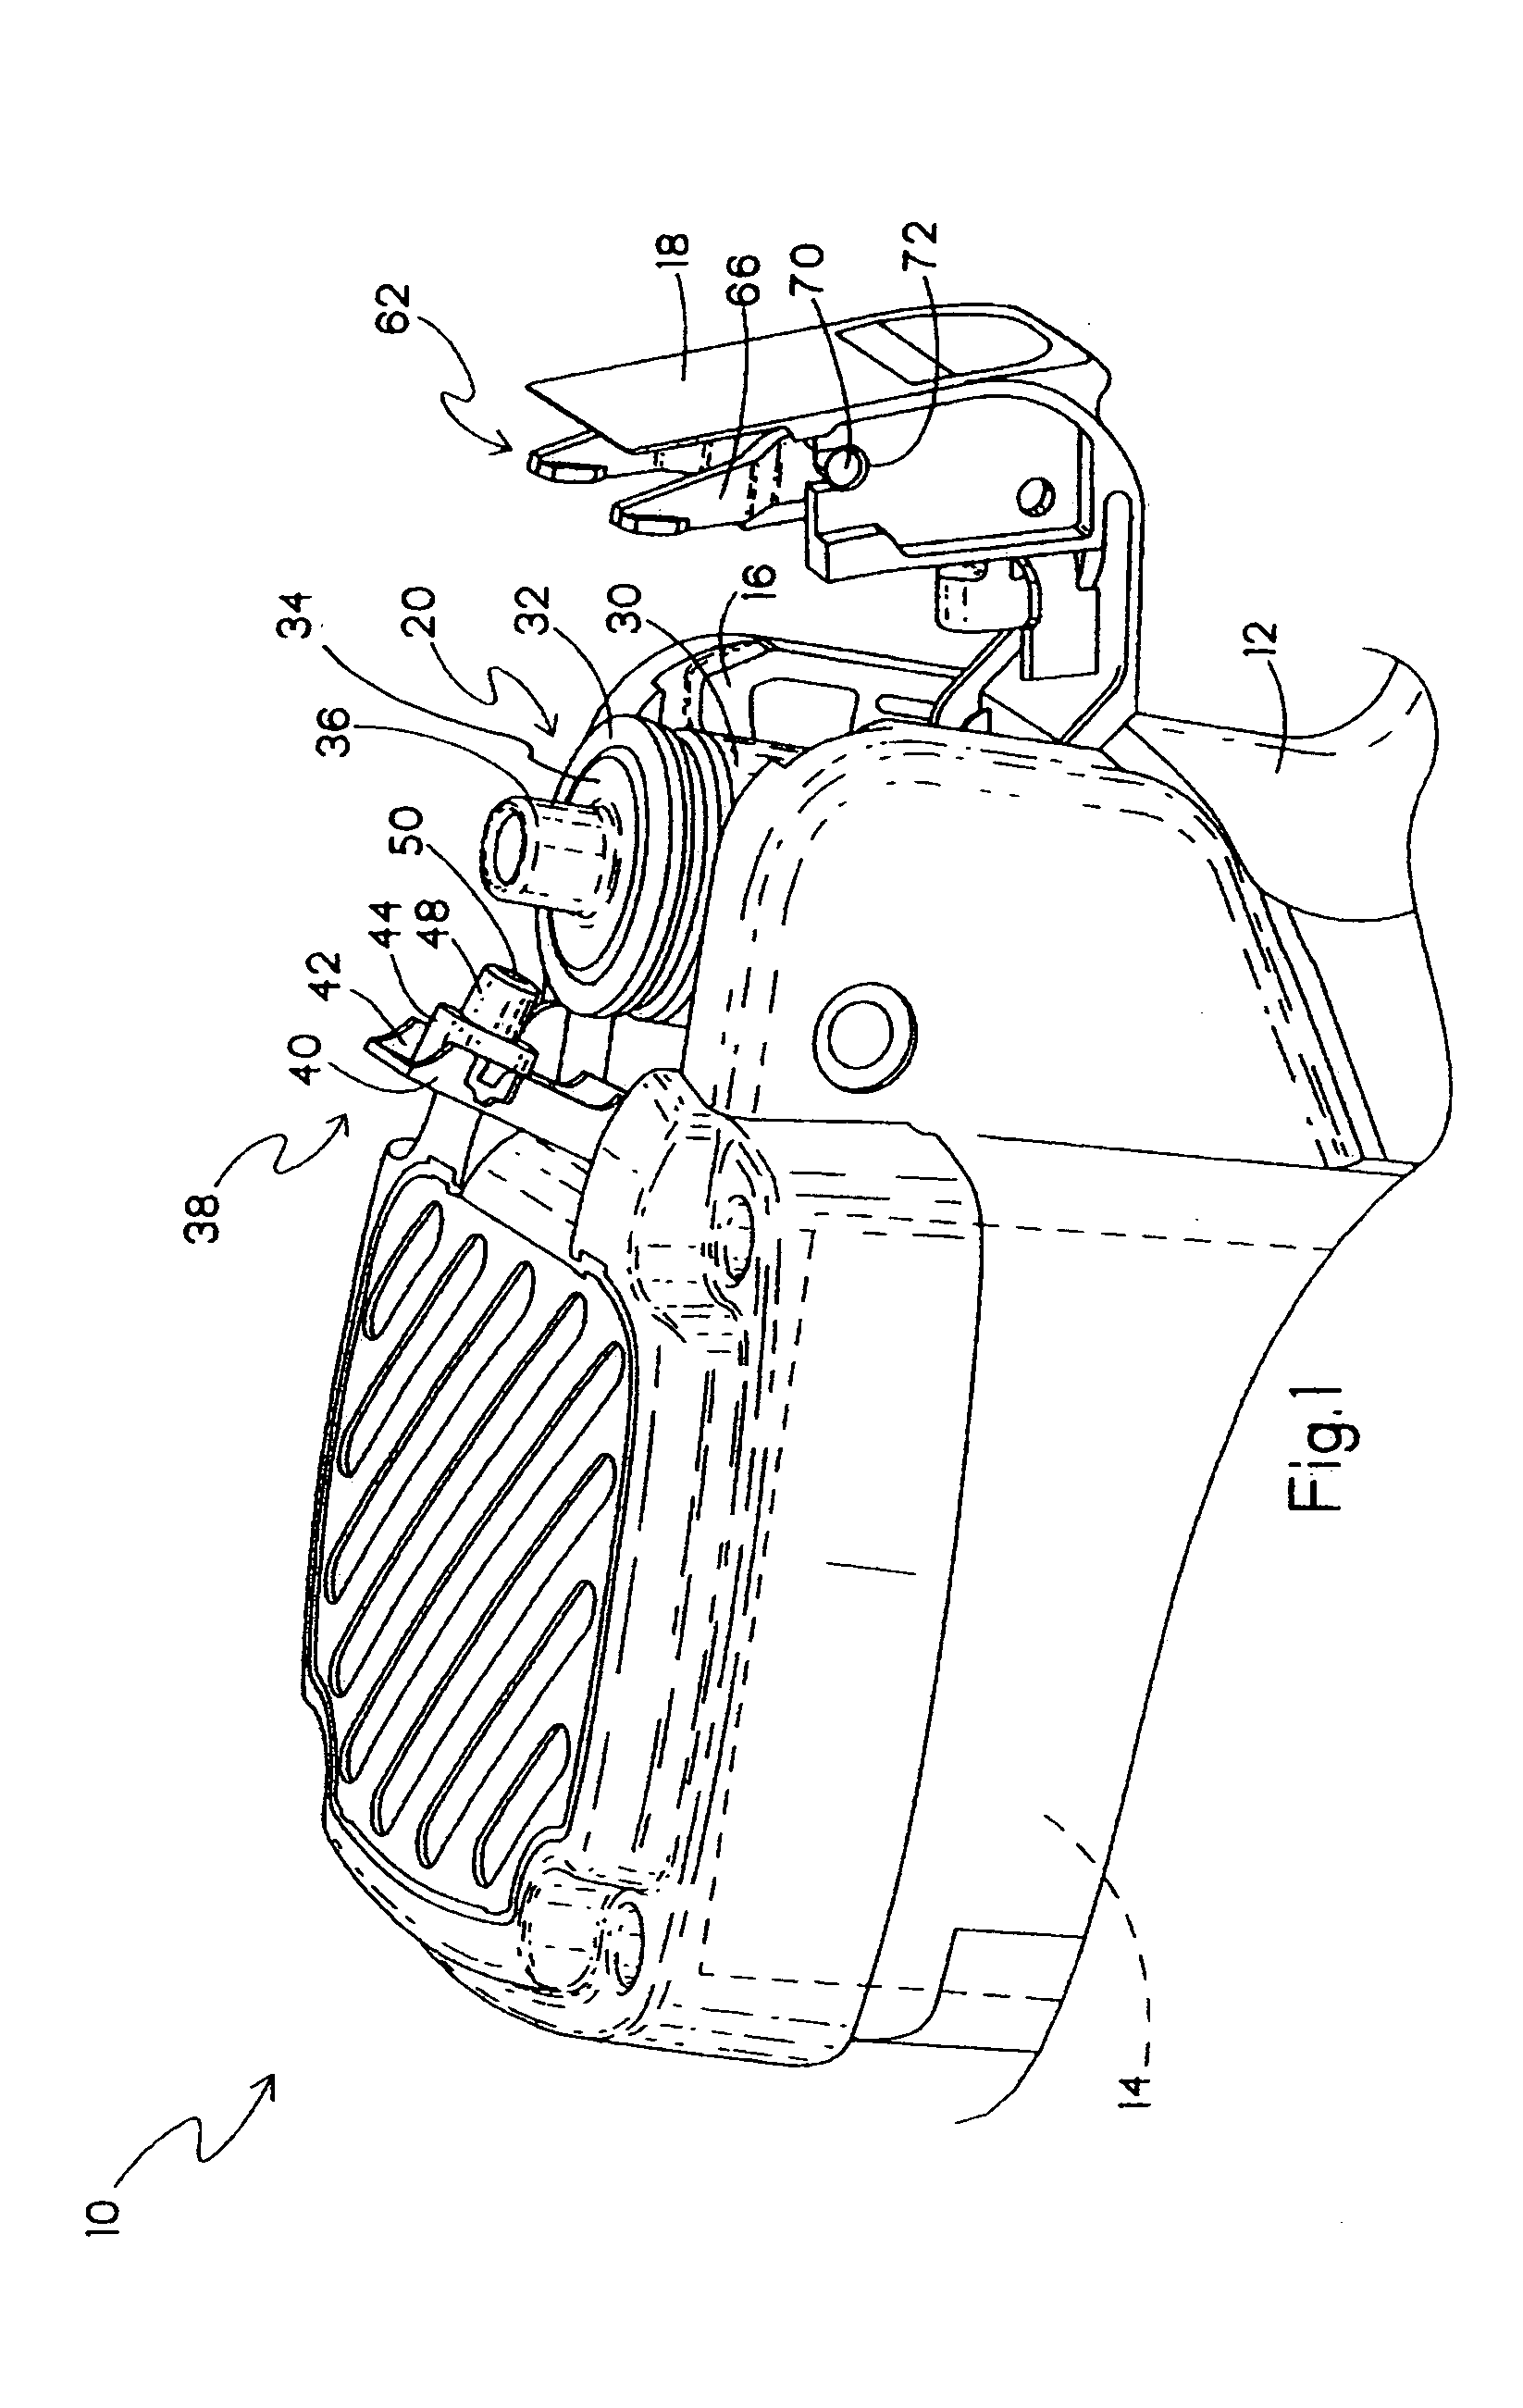 Enhanced fuel passageway and adapter for combustion tool fuel cell